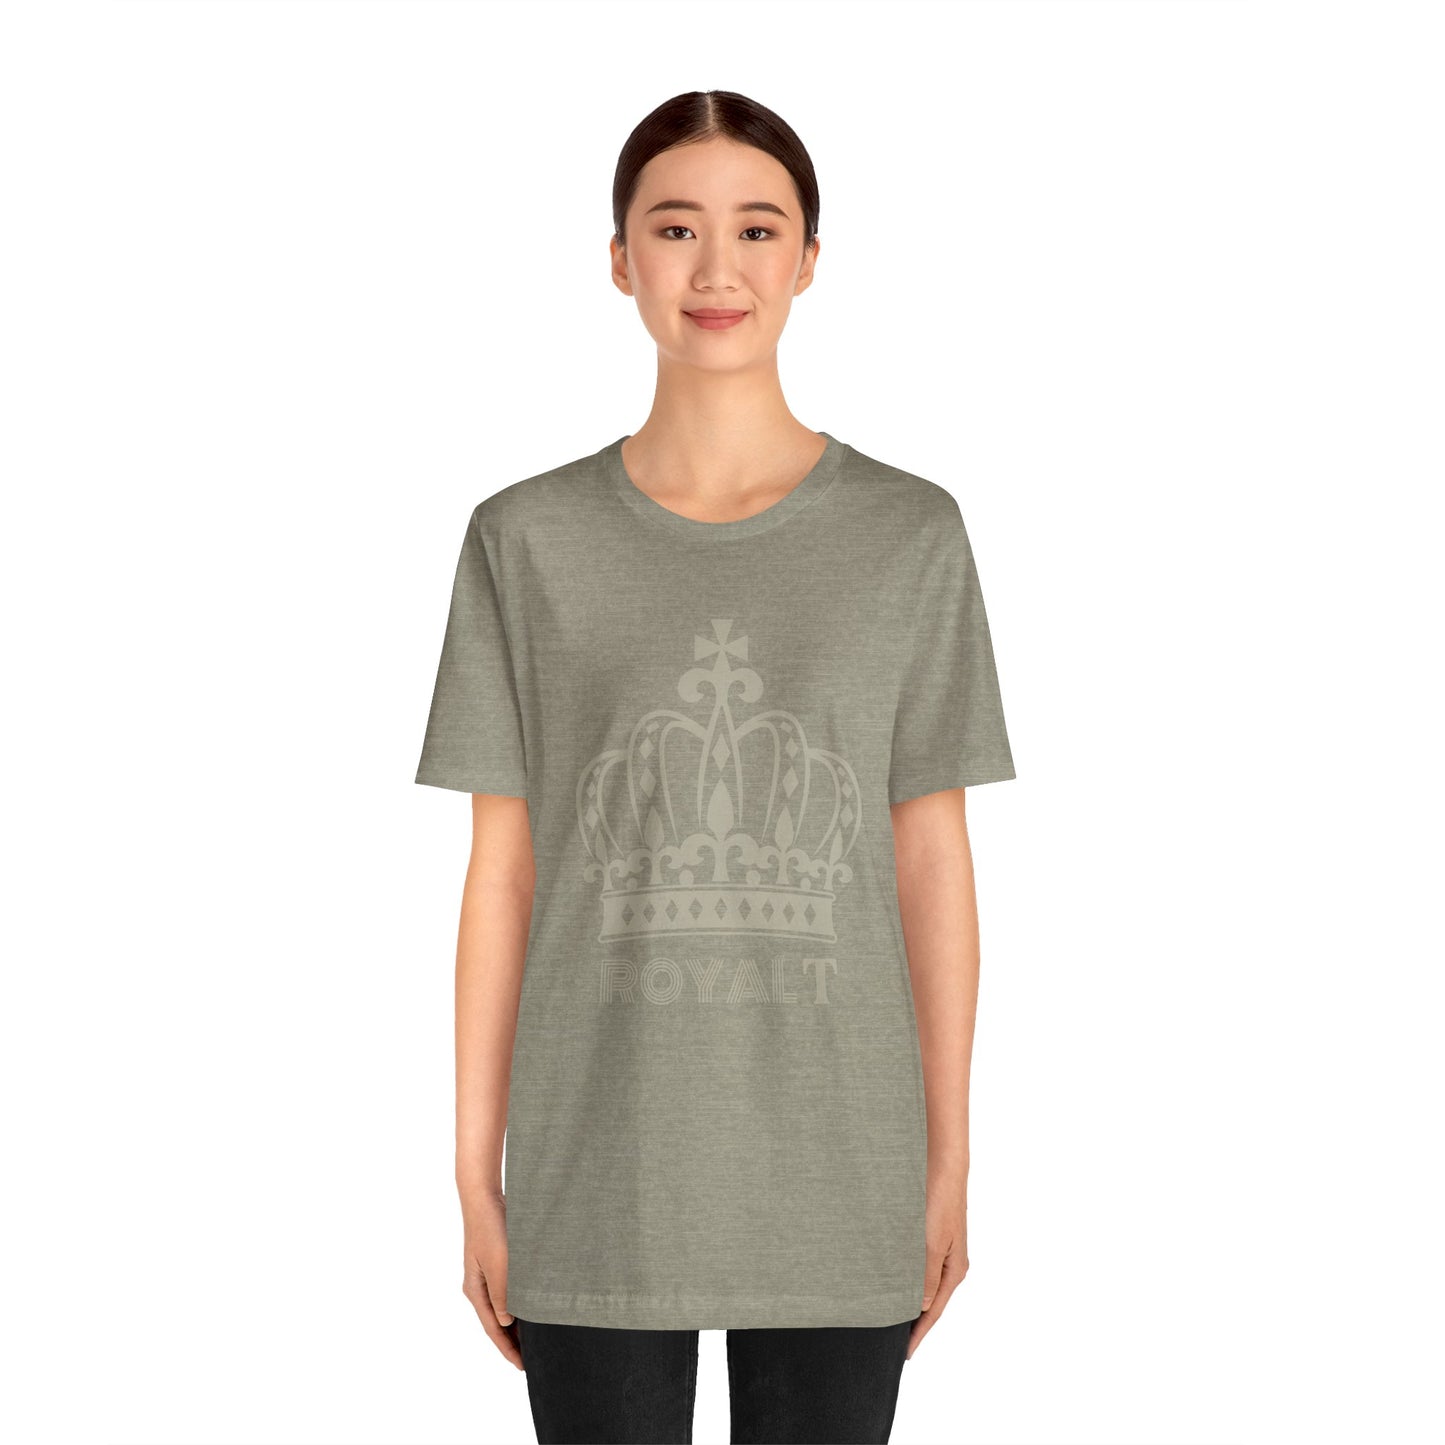 Heather Stone Brown - Unisex Jersey Short Sleeve T Shirt - Stone Brown Royal T